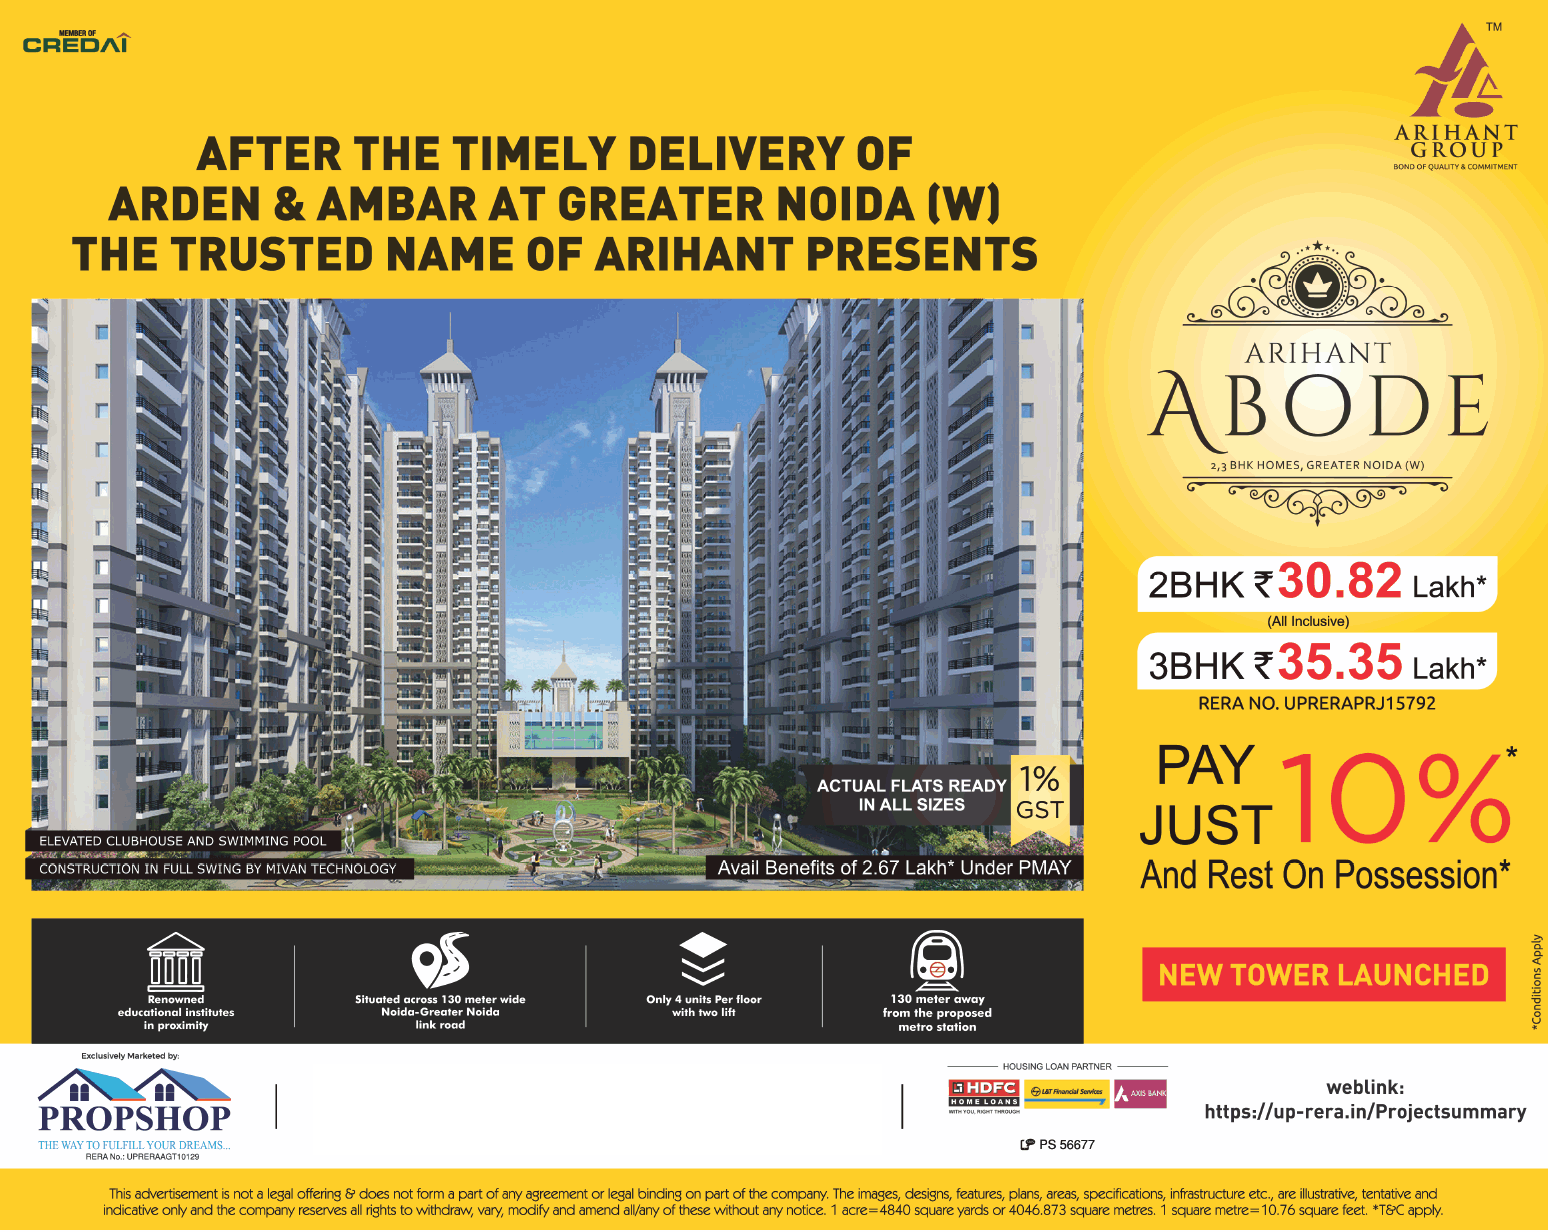 Just 10 % and rest on possession at Arihant Abode, Noida Update